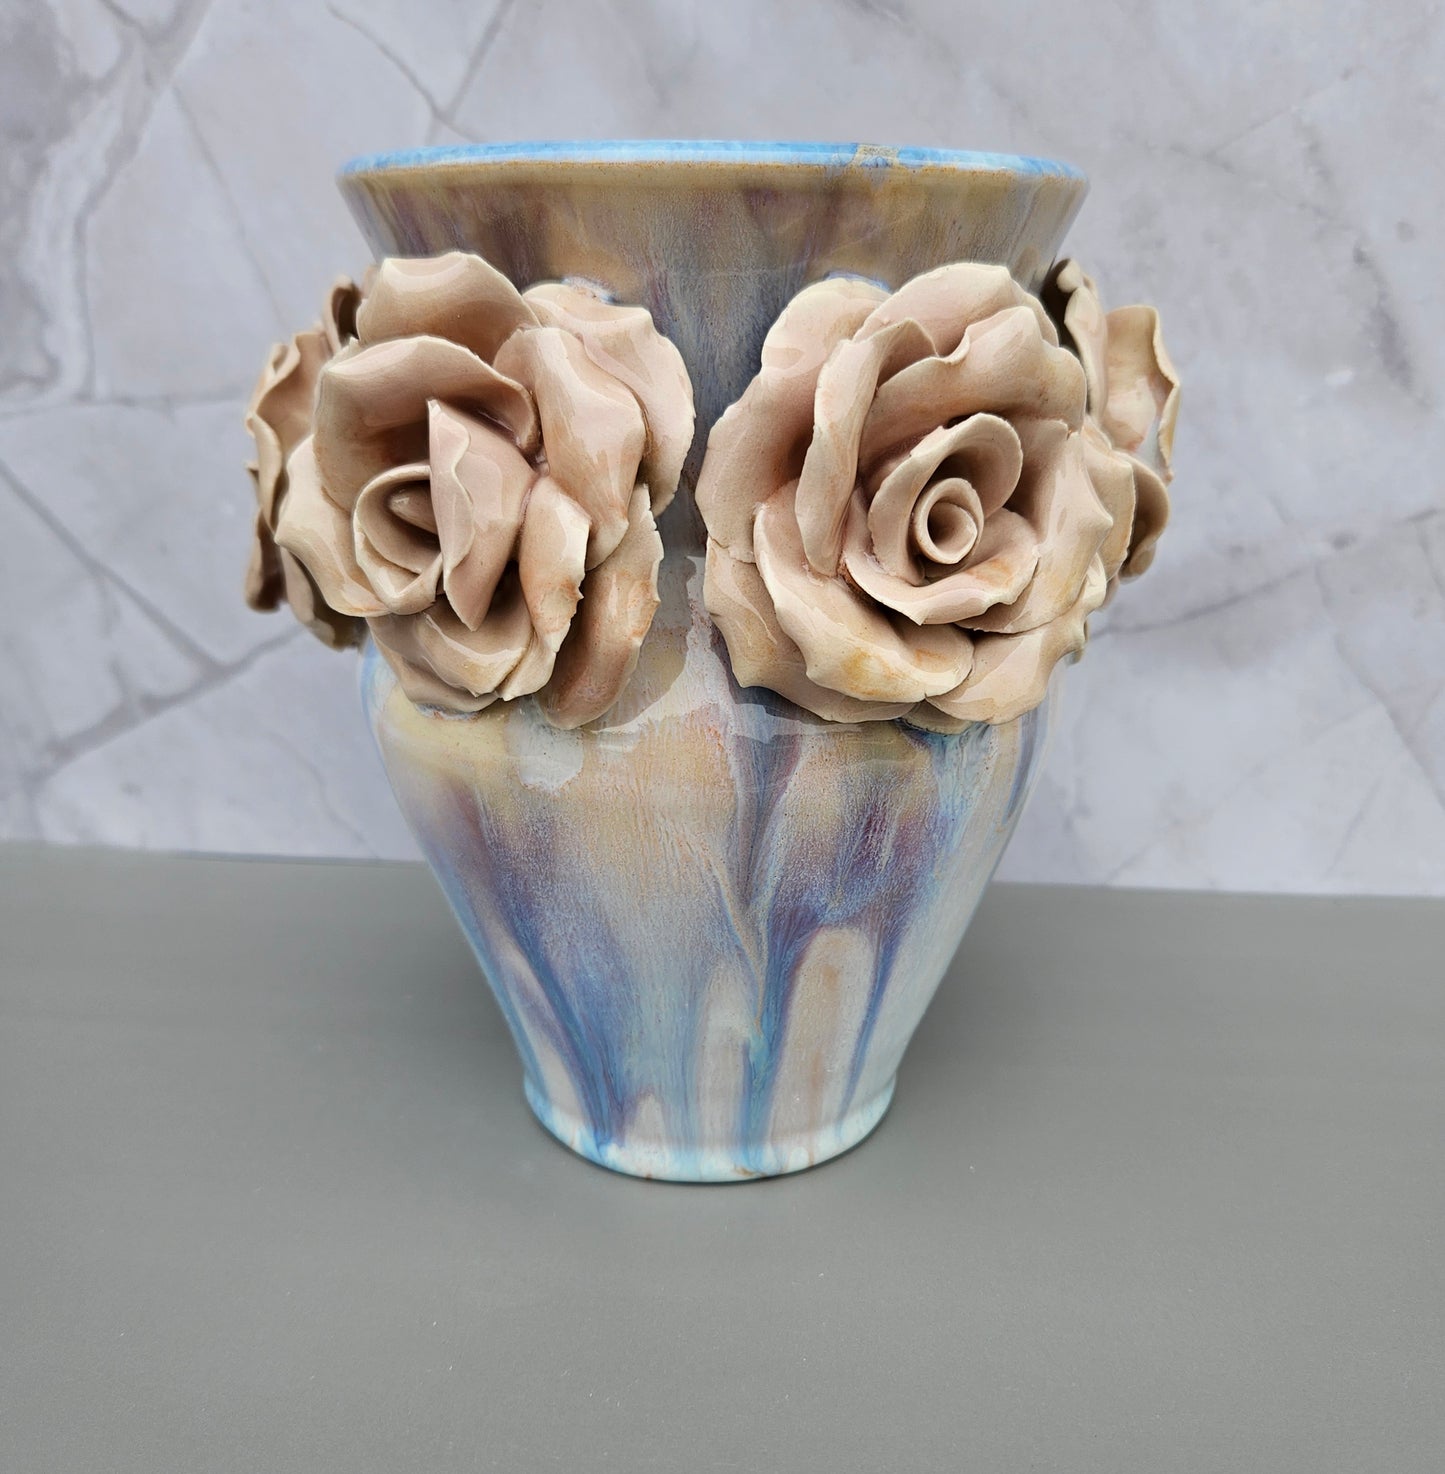 Pink, blue and white drippy rose vase, 9 inches high